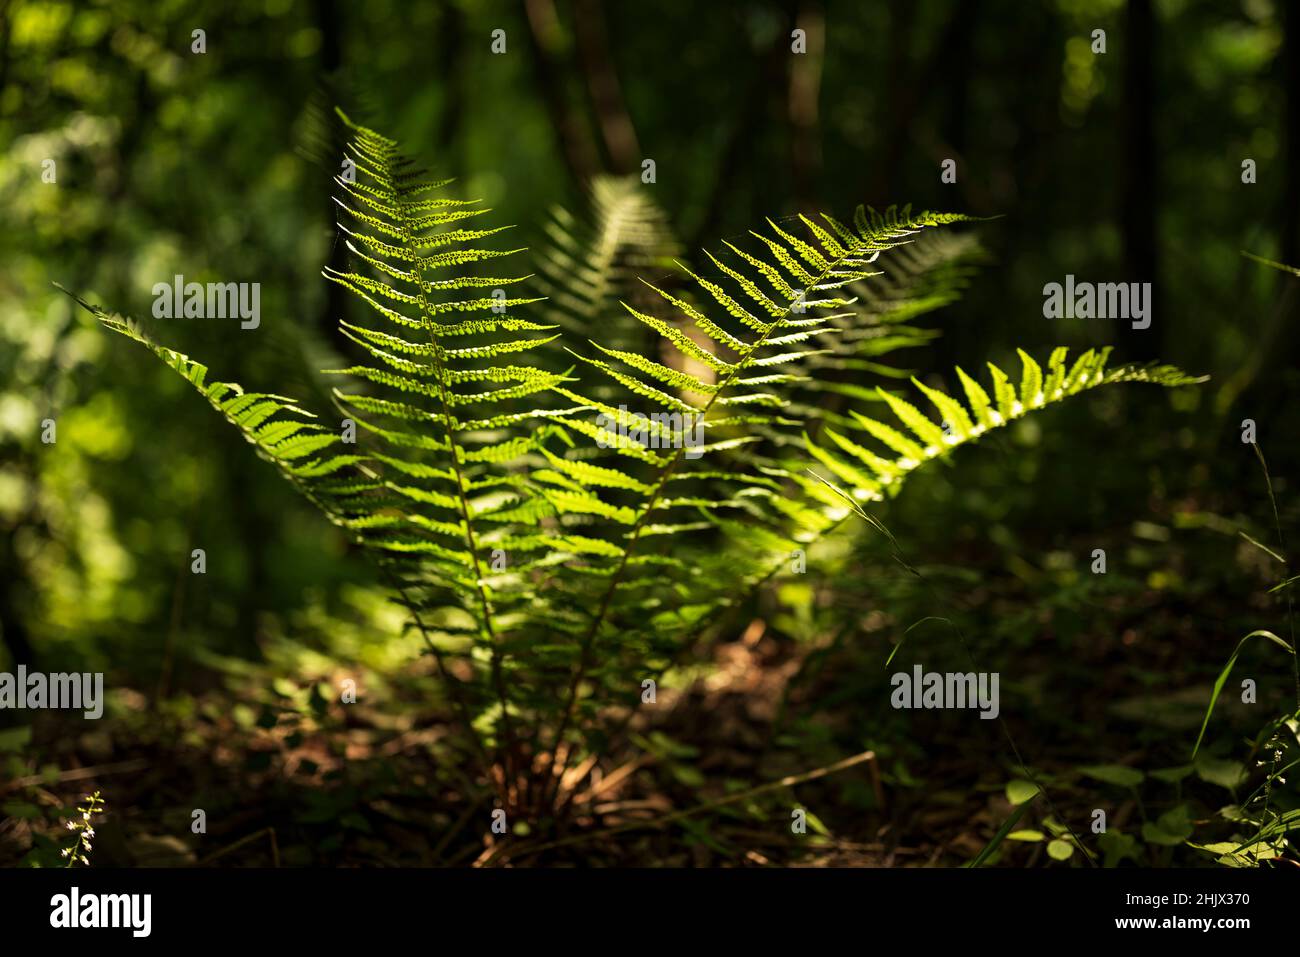 Beautiful shot of a Common lady fern (Athyrium filix-femina) in backlight in a pristine forest, Teutoburg Forest, Germany Stock Photo